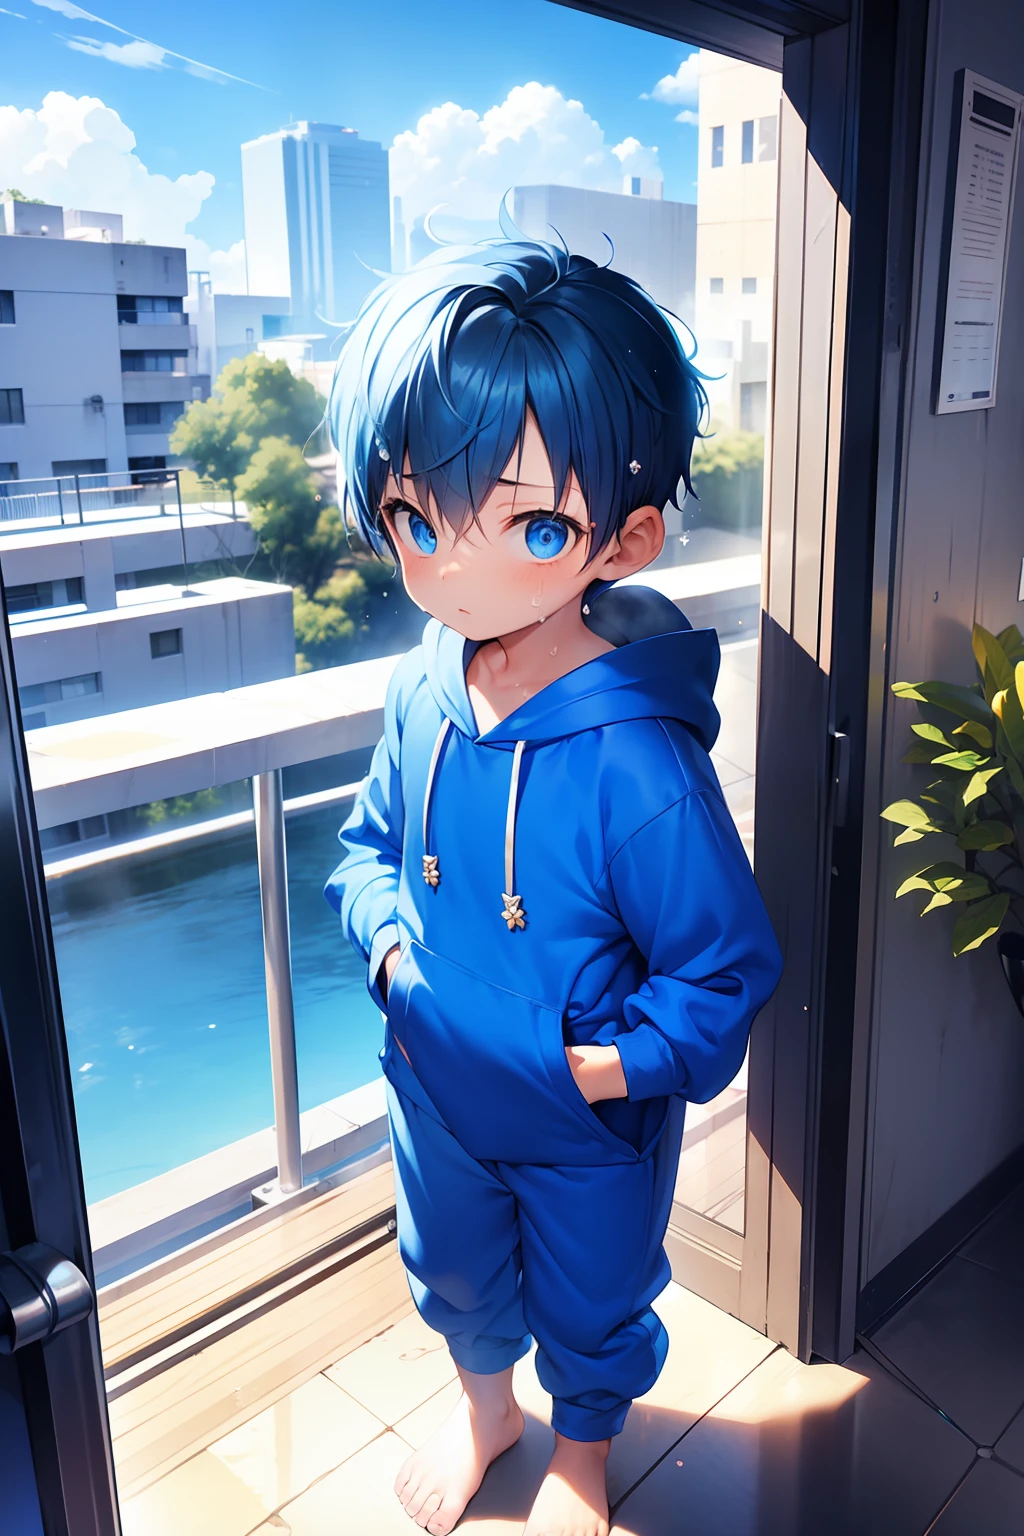 1 Little 男生 with blue hair and shiny bright blue eyes and barefoot and 小的 feet wearing a yellow oversized 连帽衫 and 运动裤 sitting on a window ledge, 脸红, 年轻的, 男生, , 小的, 学步的儿童, 小脚, (运动裤:1.4), (年轻的:1.4), (孩子:1.4), (翔太:1.4), (连帽衫:1.4),